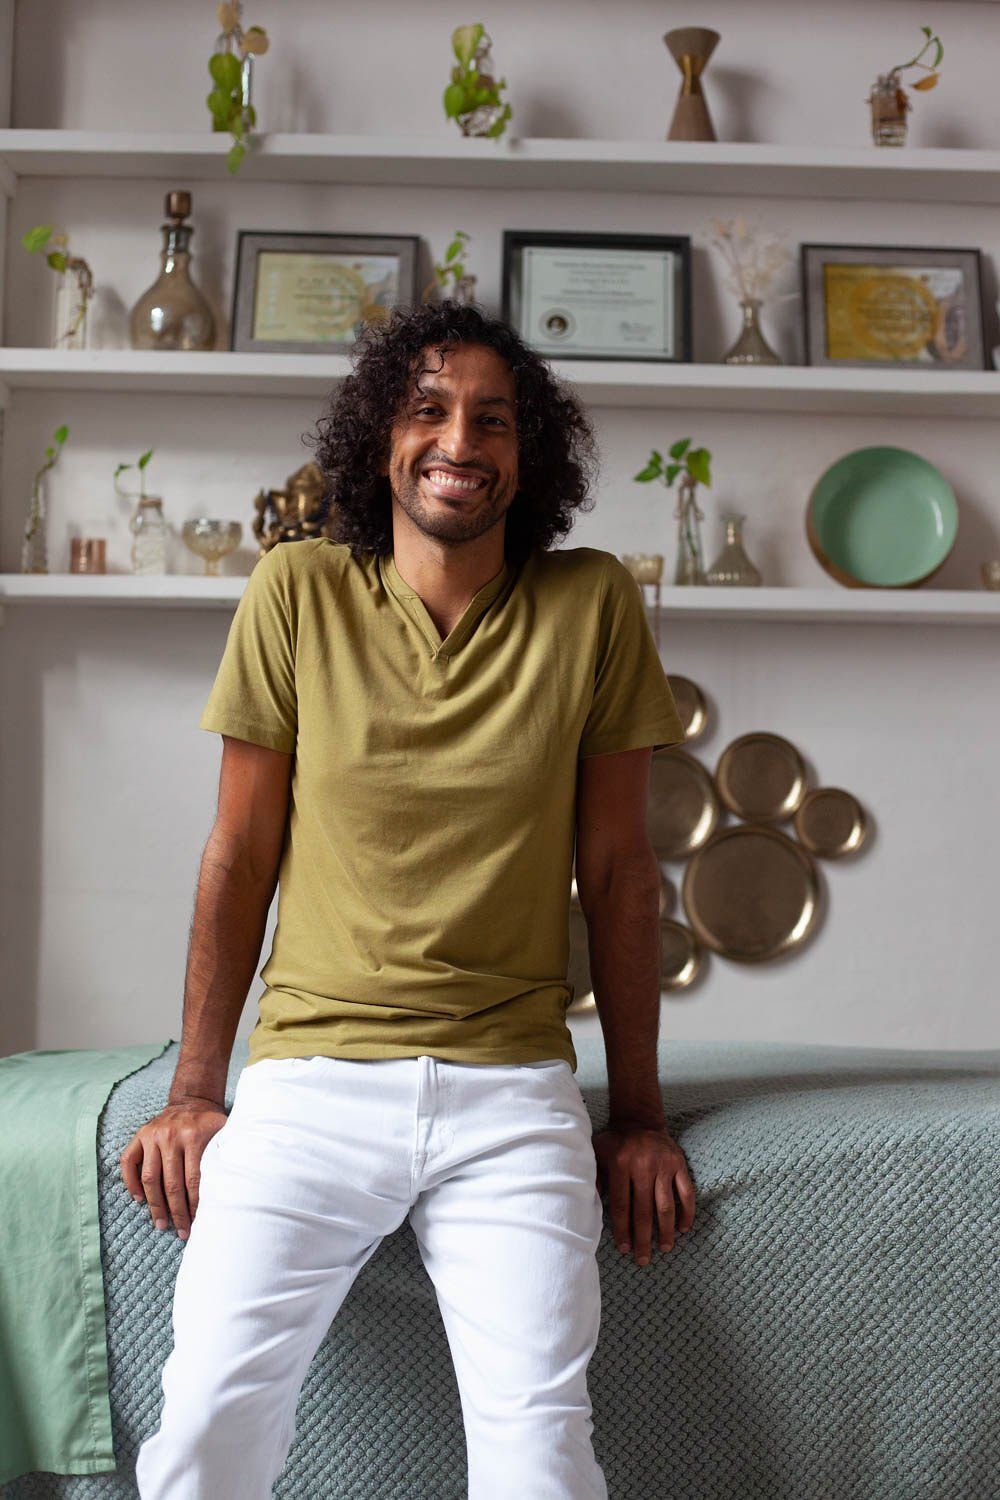 A man in a green shirt and white pants is leaning on a bed.